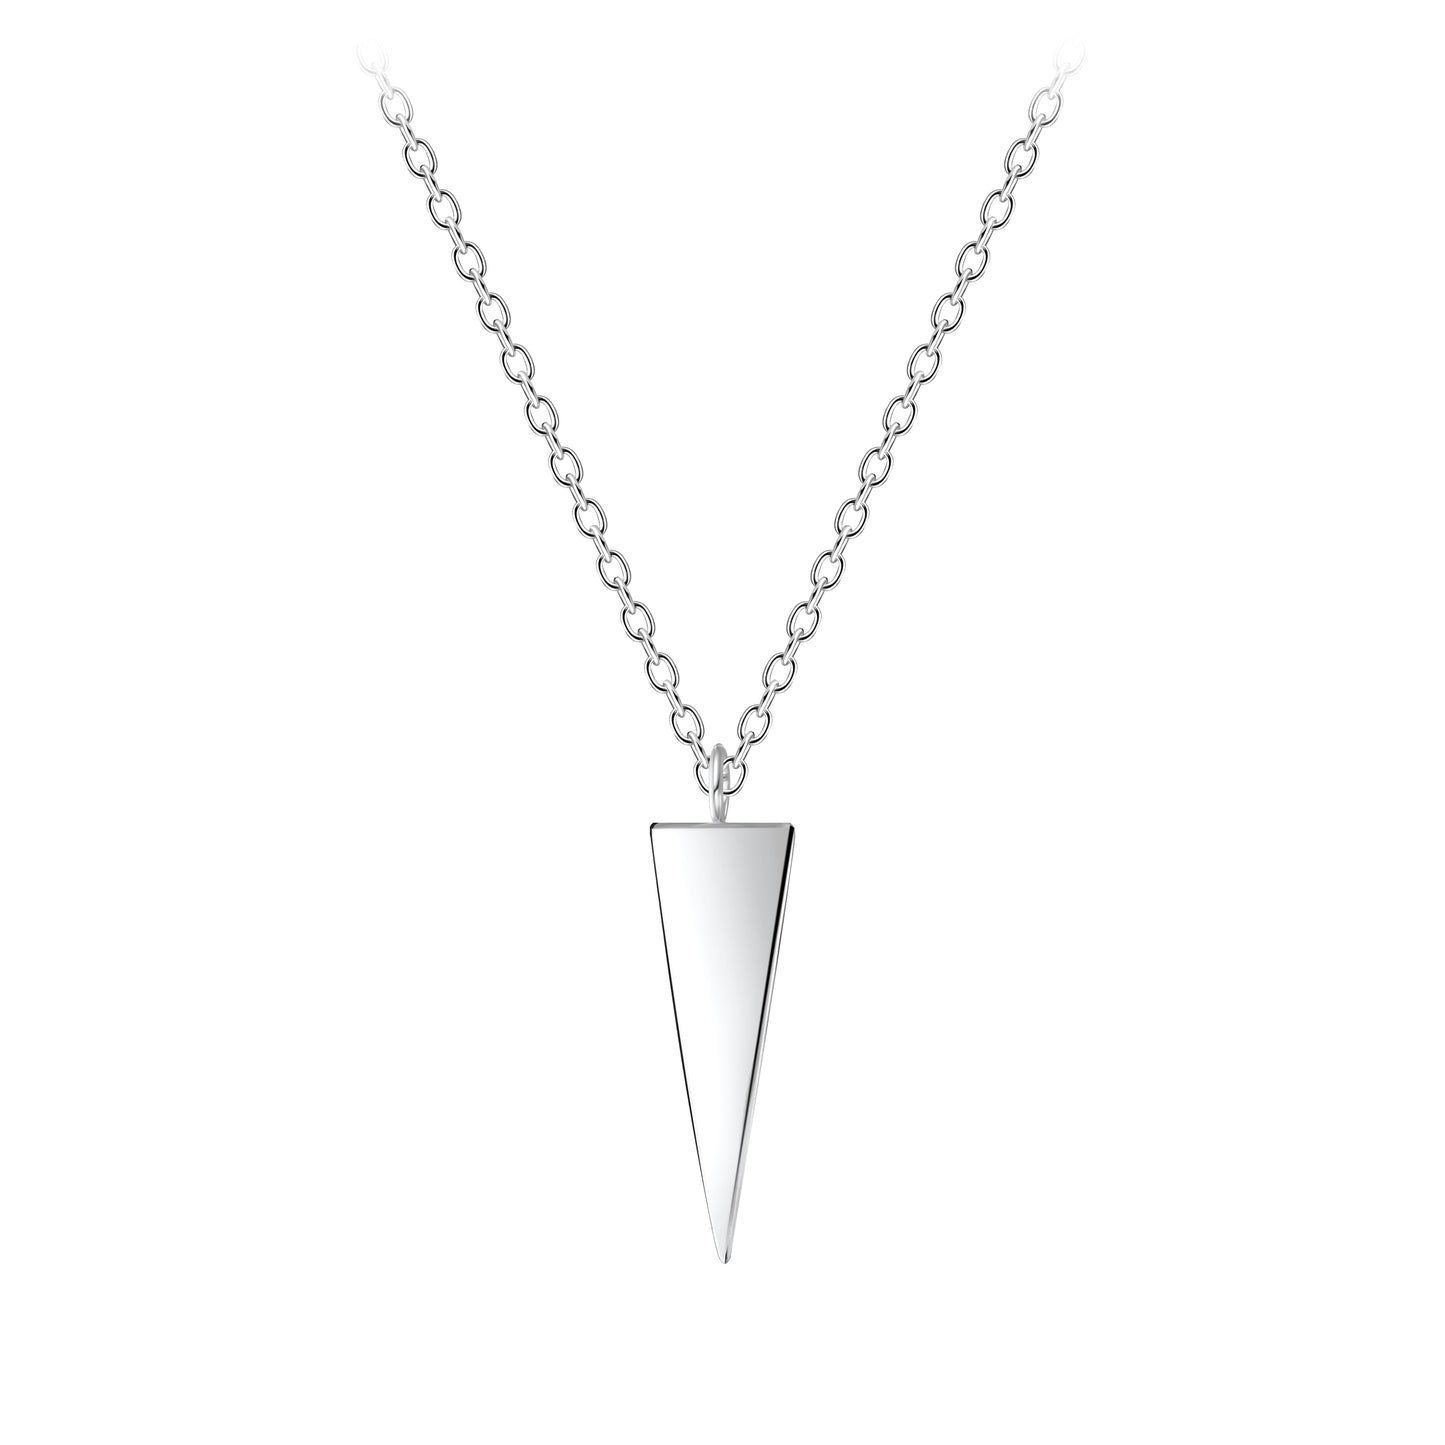 Sterling Silver Triangle Pendant Necklace